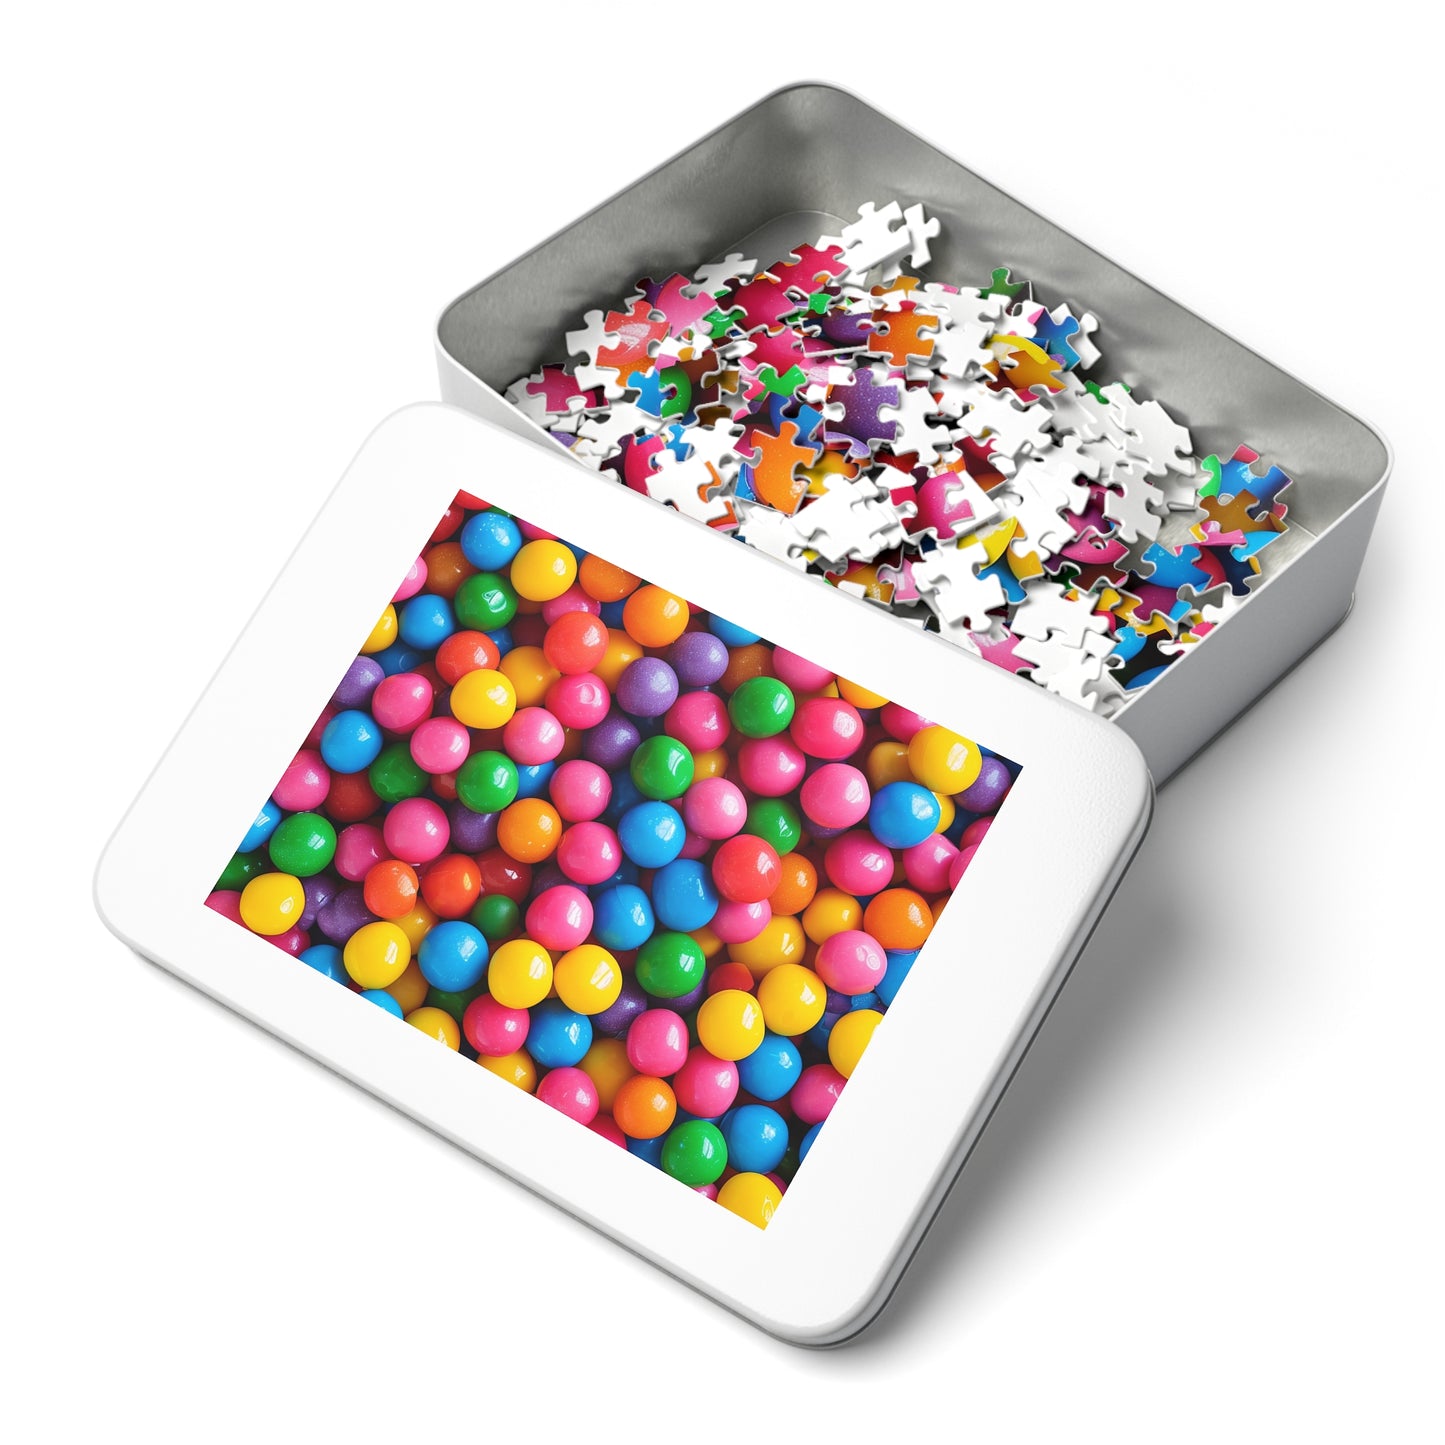 Colorful Gumballs  Jigsaw Puzzle (30, 110, 252, 500,1000-Piece)